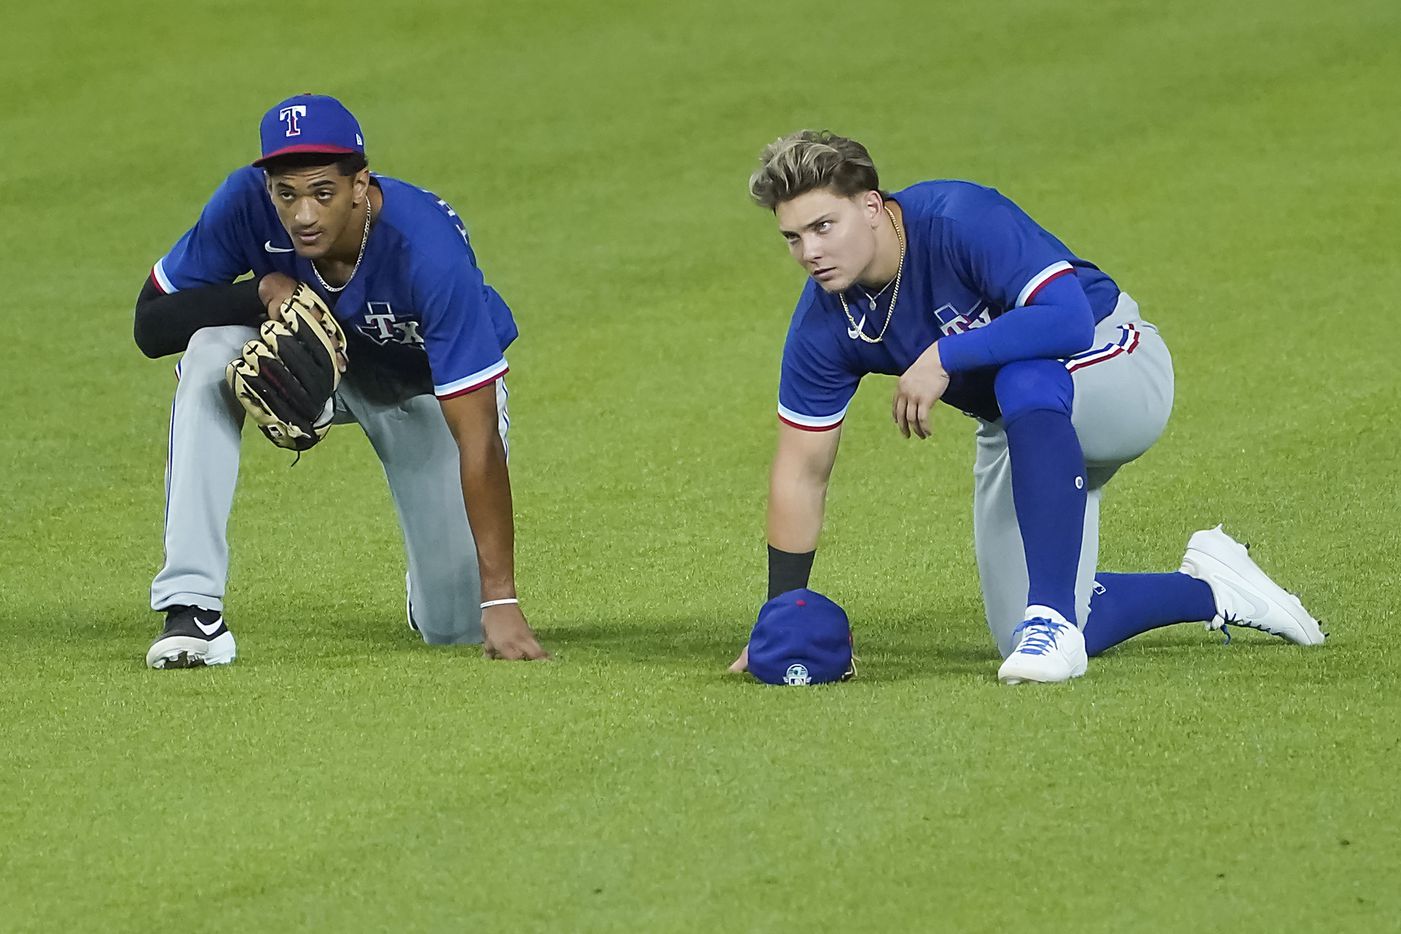 Texas Rangers outfielders Bubba Thompson (left) and Steele Walker take a knee as the watch...